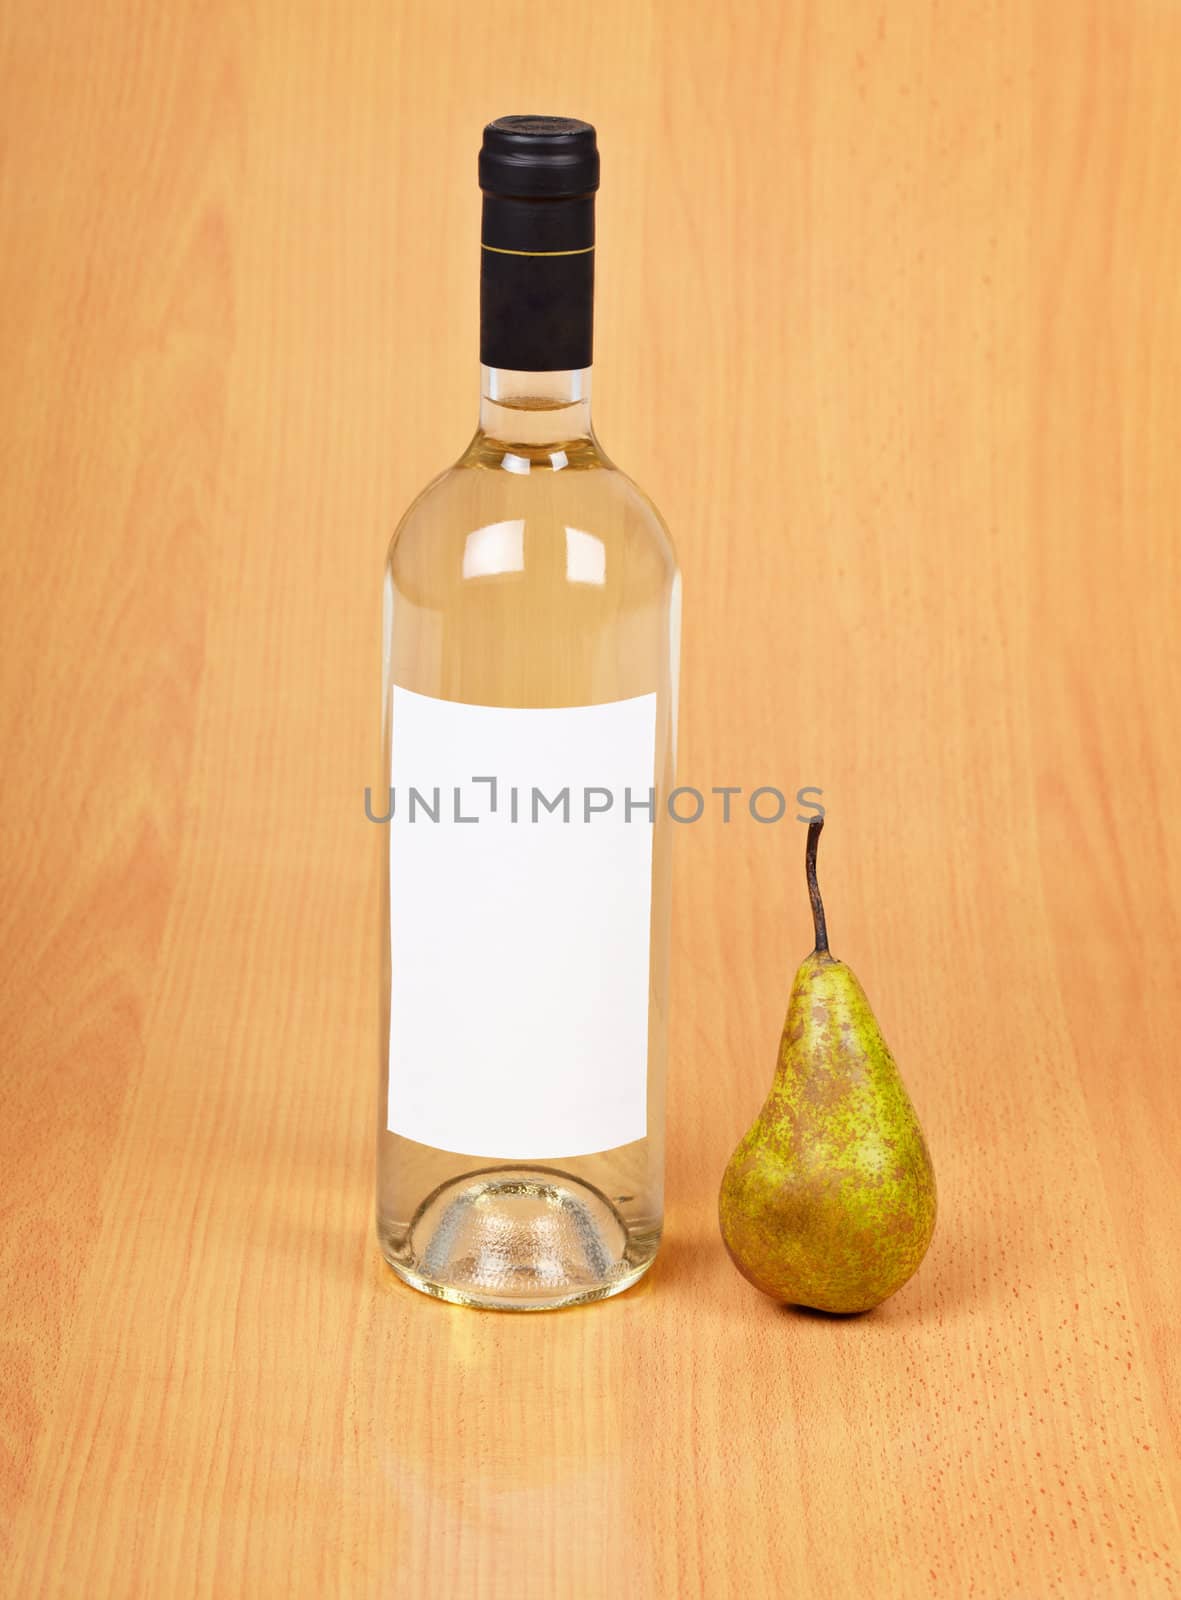 A bottle of pear wine on a wooden background